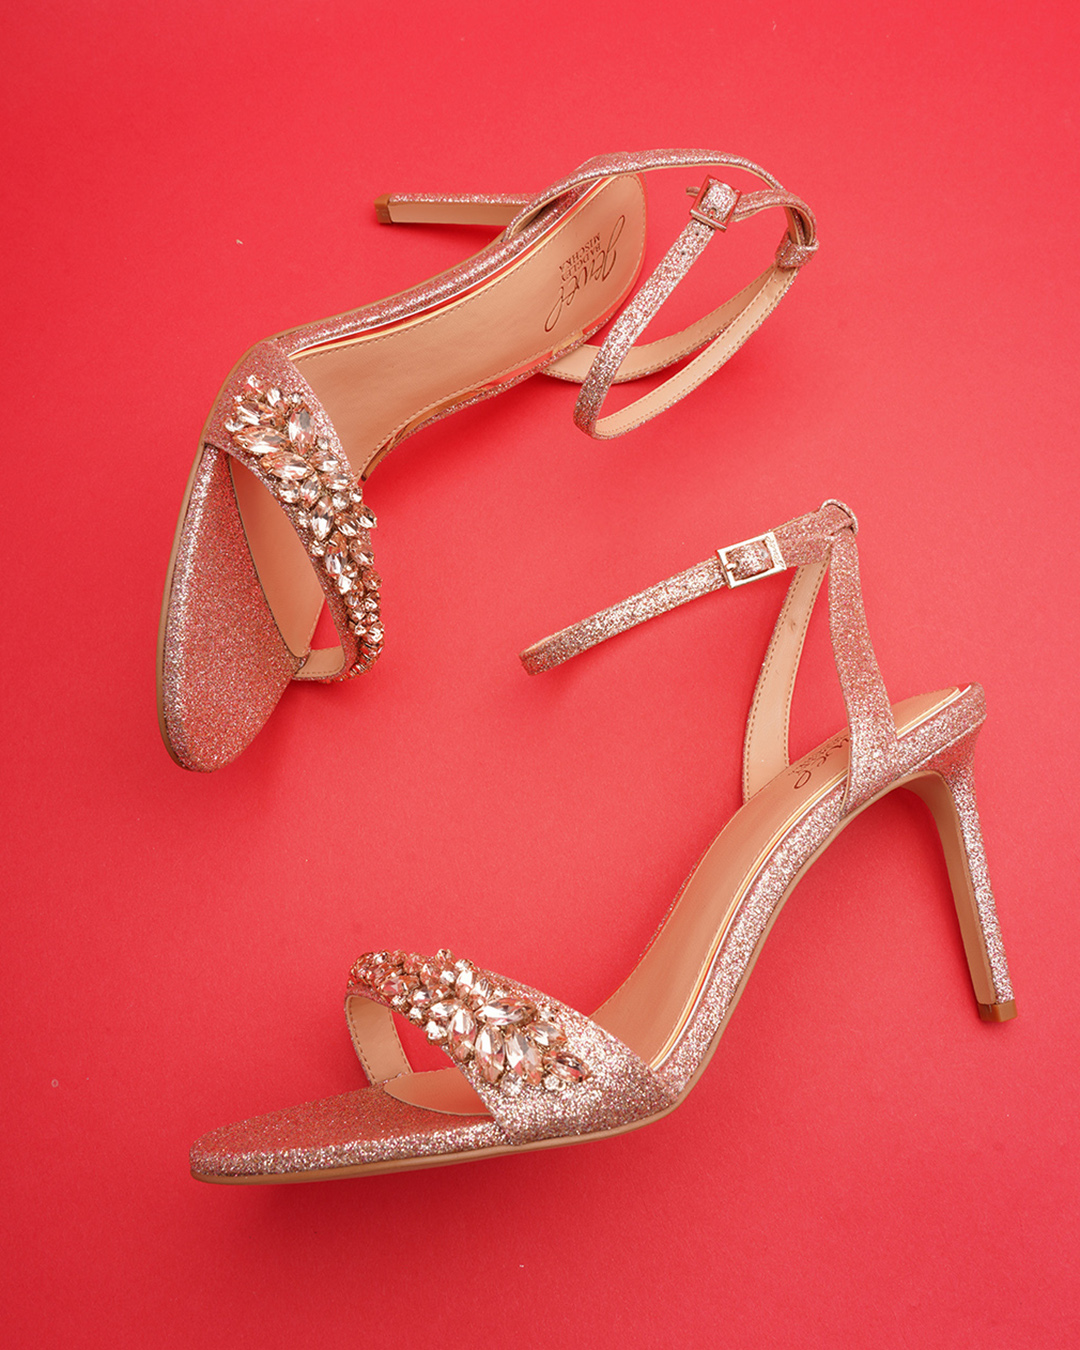 rose gold shoes for wedding with ankle straps sparkle badgleymischka